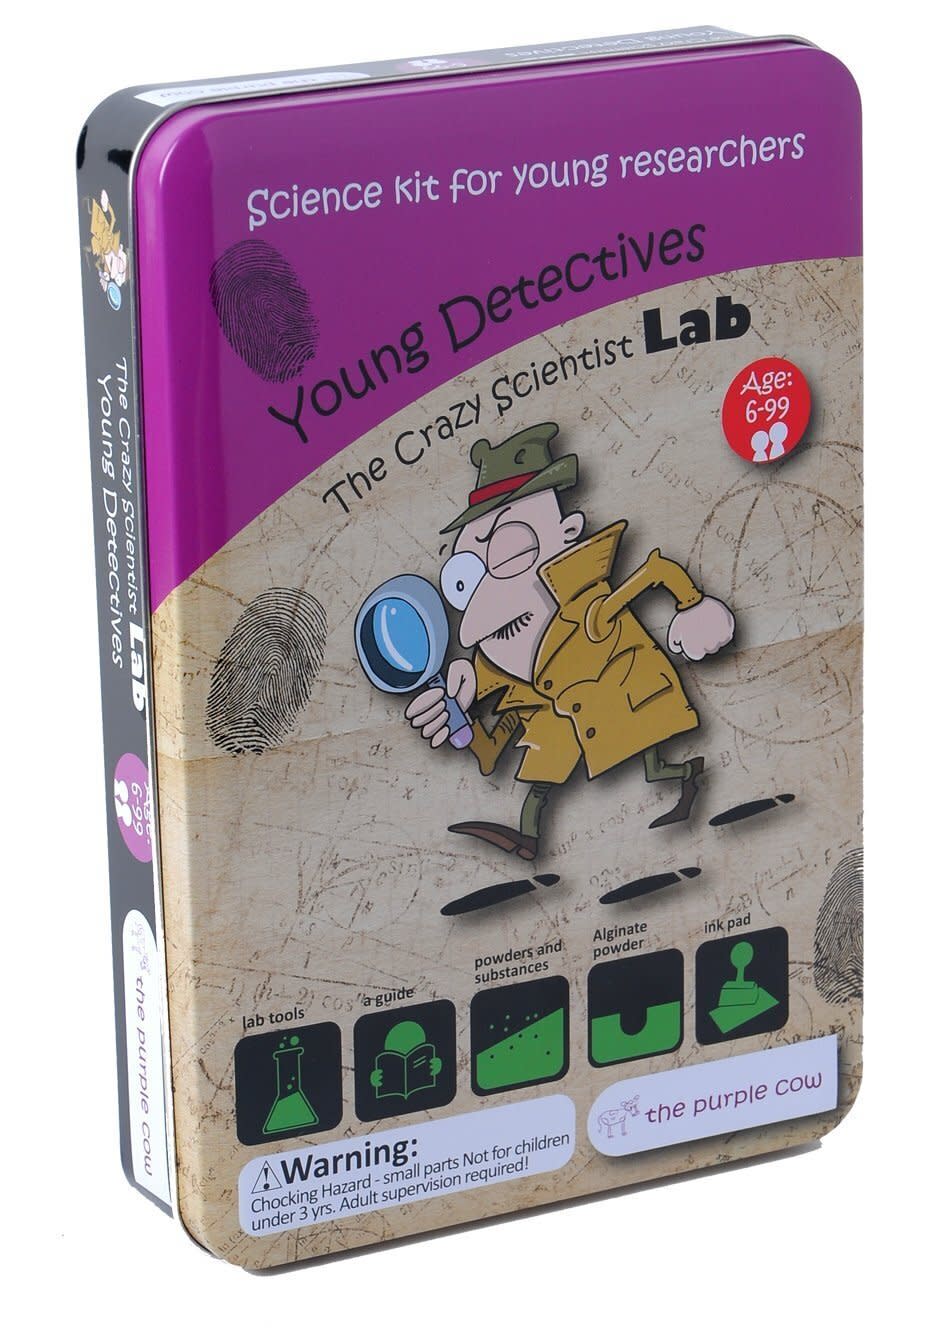 This <strong><a href="https://amzn.to/2X8Pl9g" target="_blank" rel="noopener noreferrer">comprehensive spy kit</a></strong> has everything a budding detective needs. You can also toss in some <strong><a href="https://amzn.to/2phWyYo" target="_blank" rel="noopener noreferrer">real walkie-talkies﻿</a></strong> to get her off and running. <strong><a href="https://amzn.to/2X8Pl9g" target="_blank" rel="noopener noreferrer">Get it on Amazon</a></strong>.